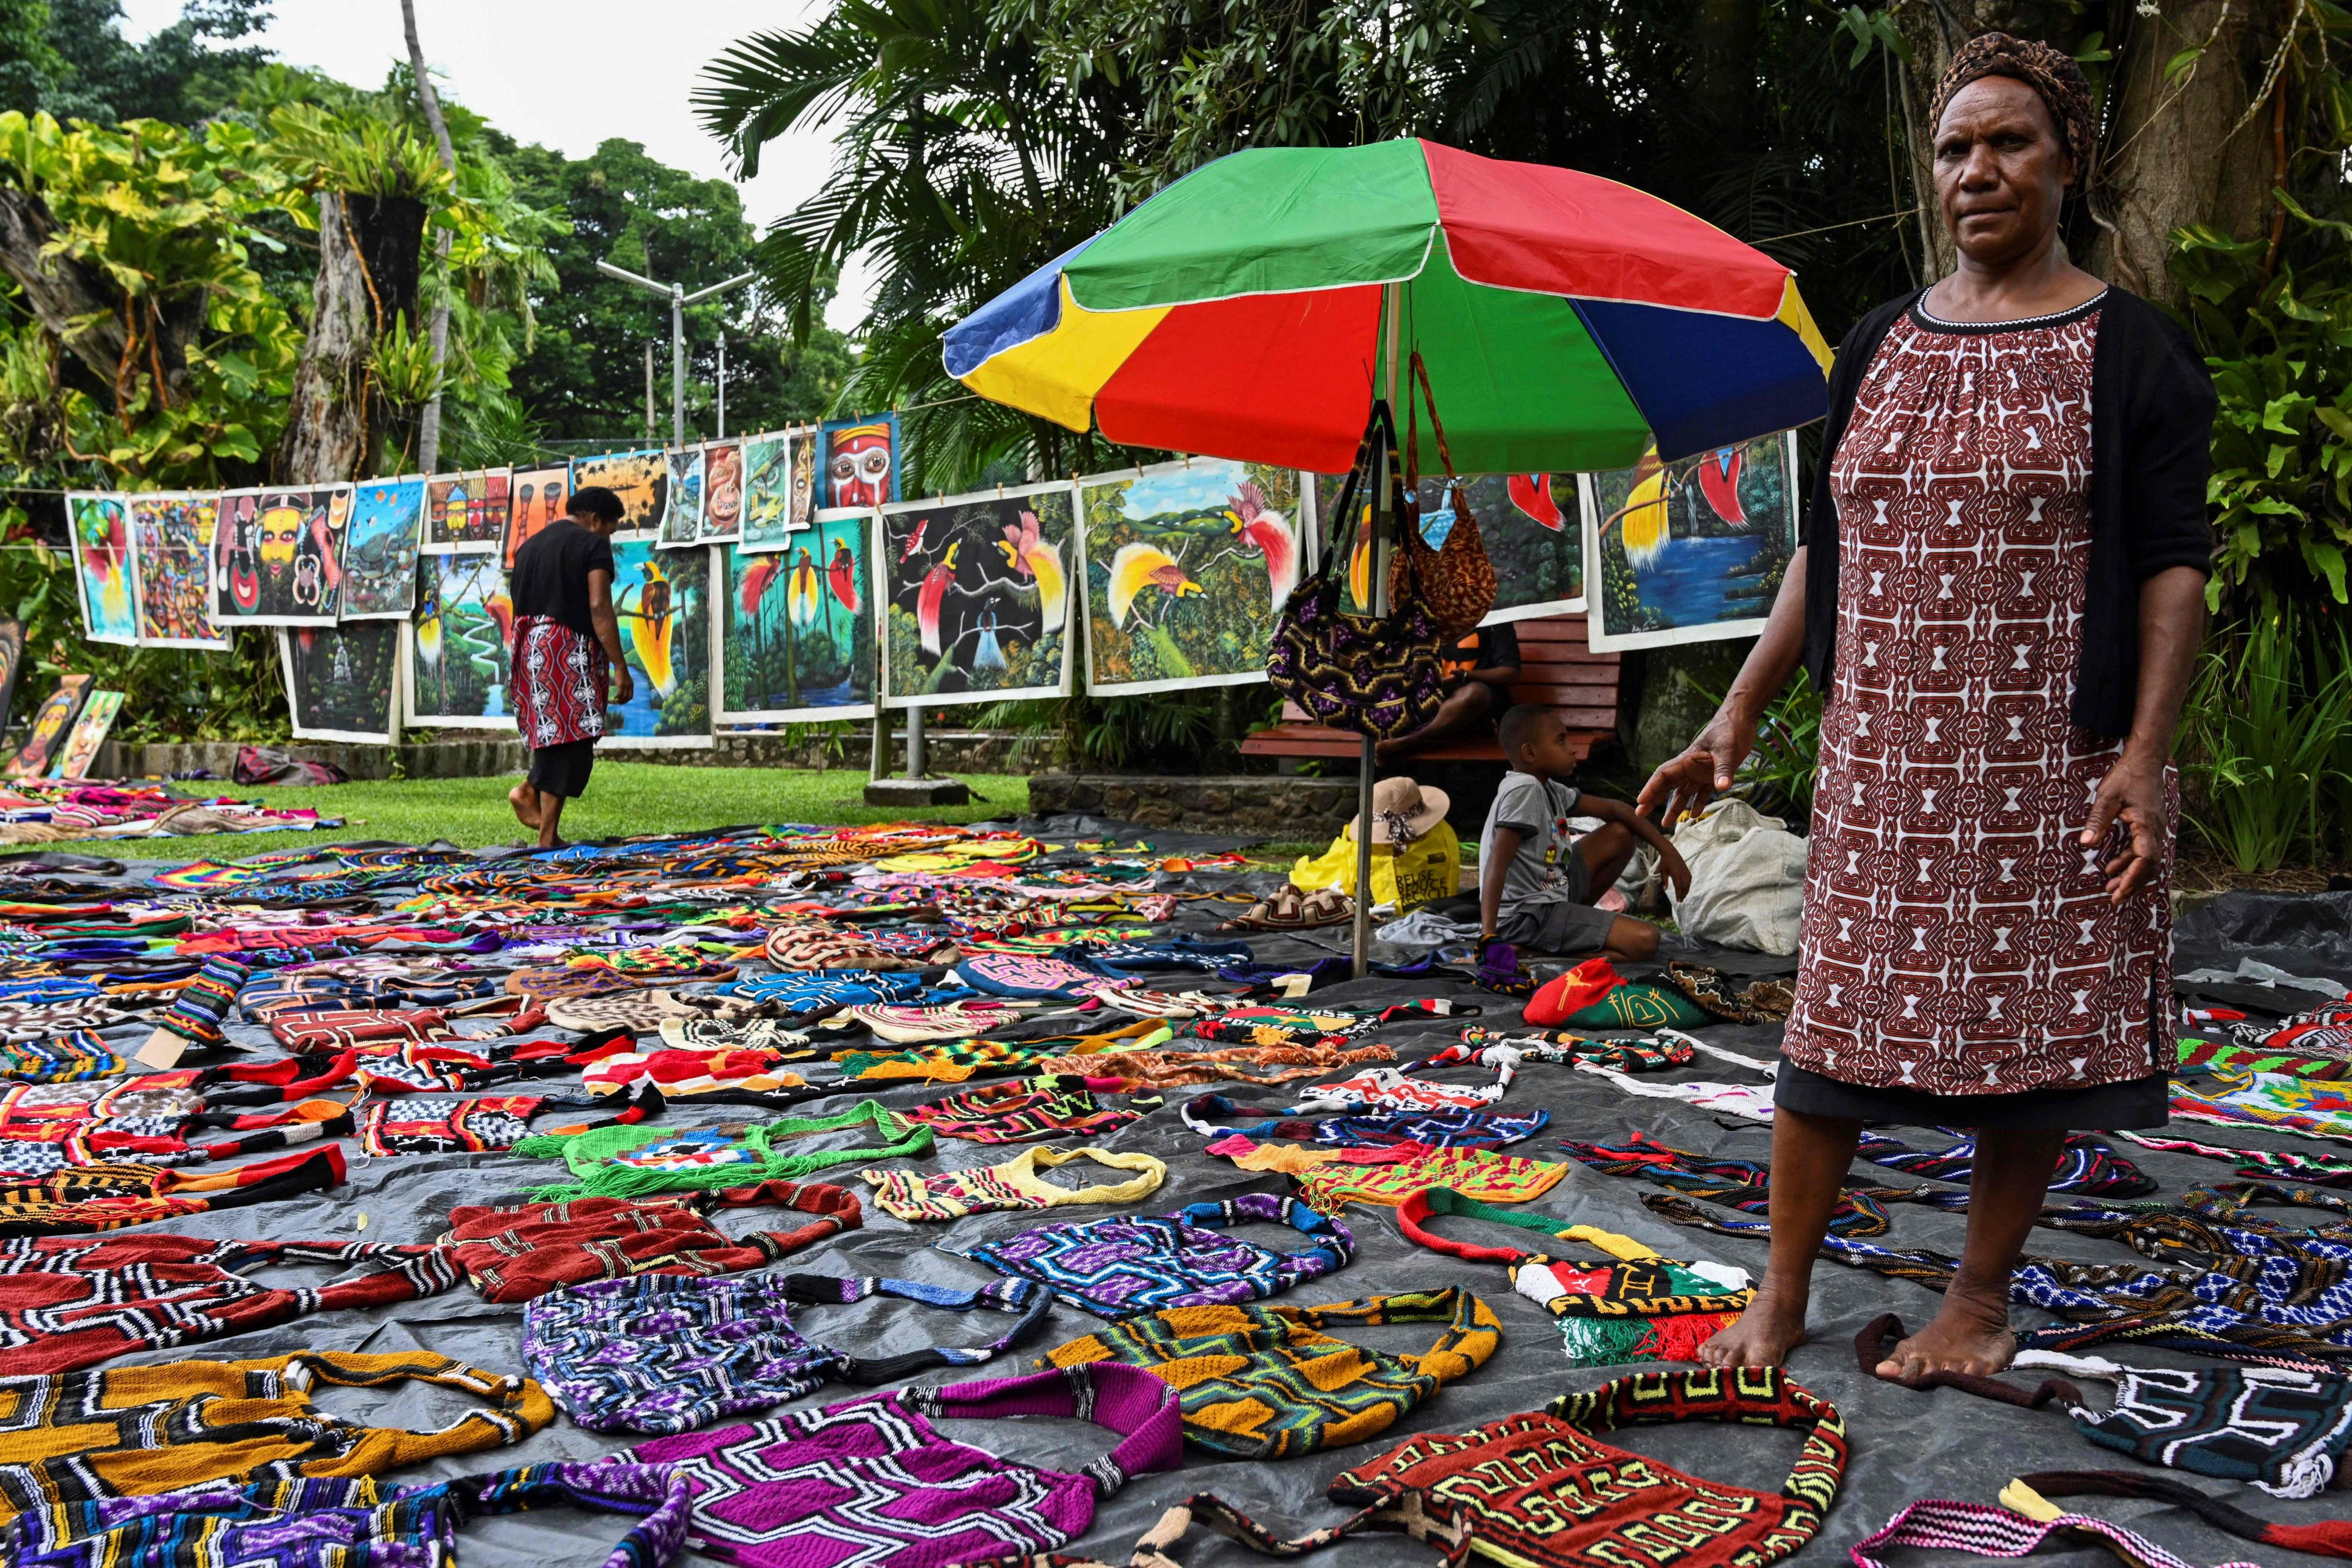 A woman selling traditional Papua New Guinean “Bilum” bags at a craft market in Port Moresby. The word bilum means “womb” in the local Tok Pisin language. Photo: AFP